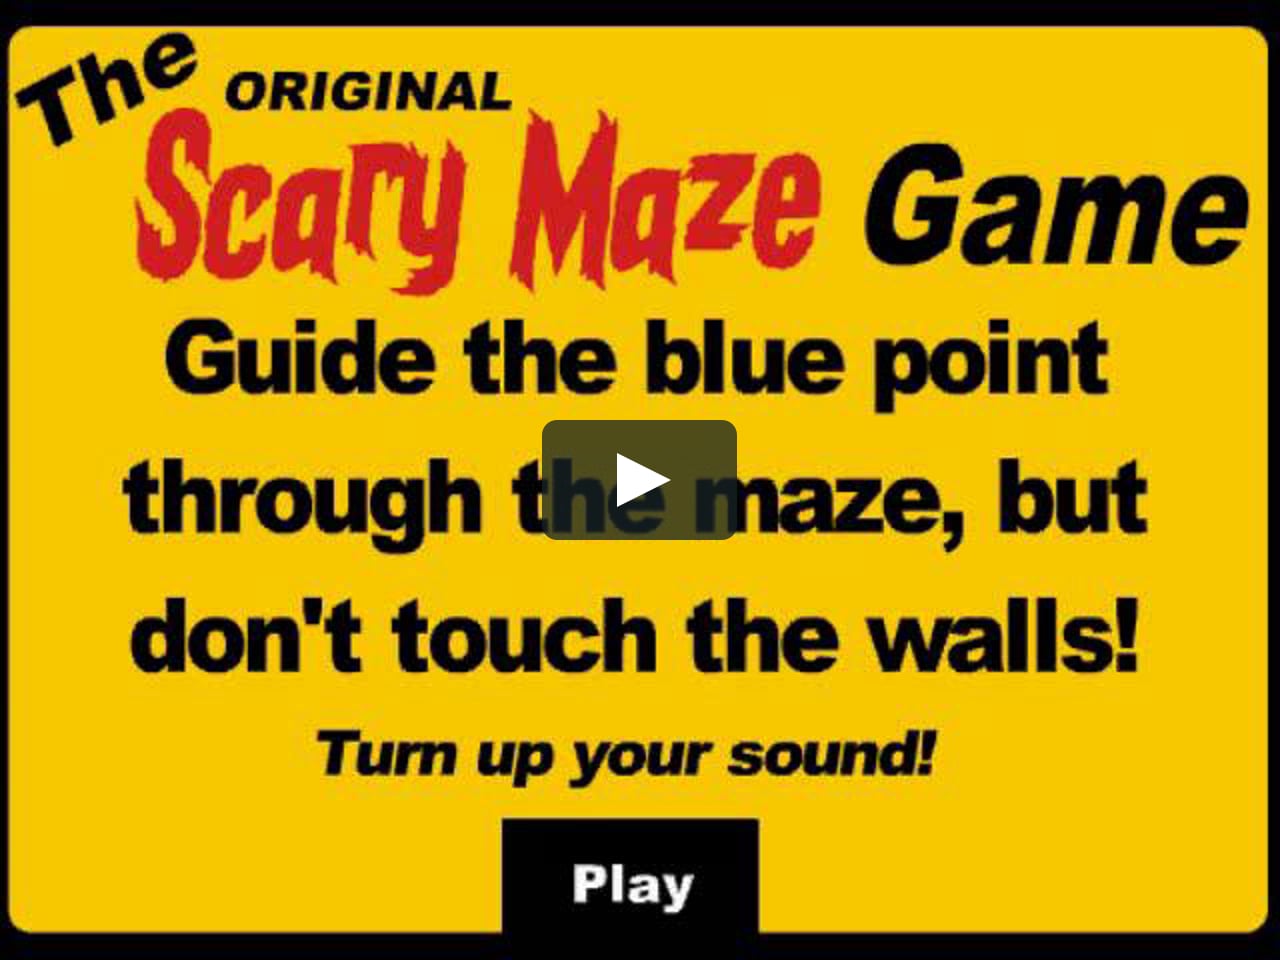 what is the scary maze game